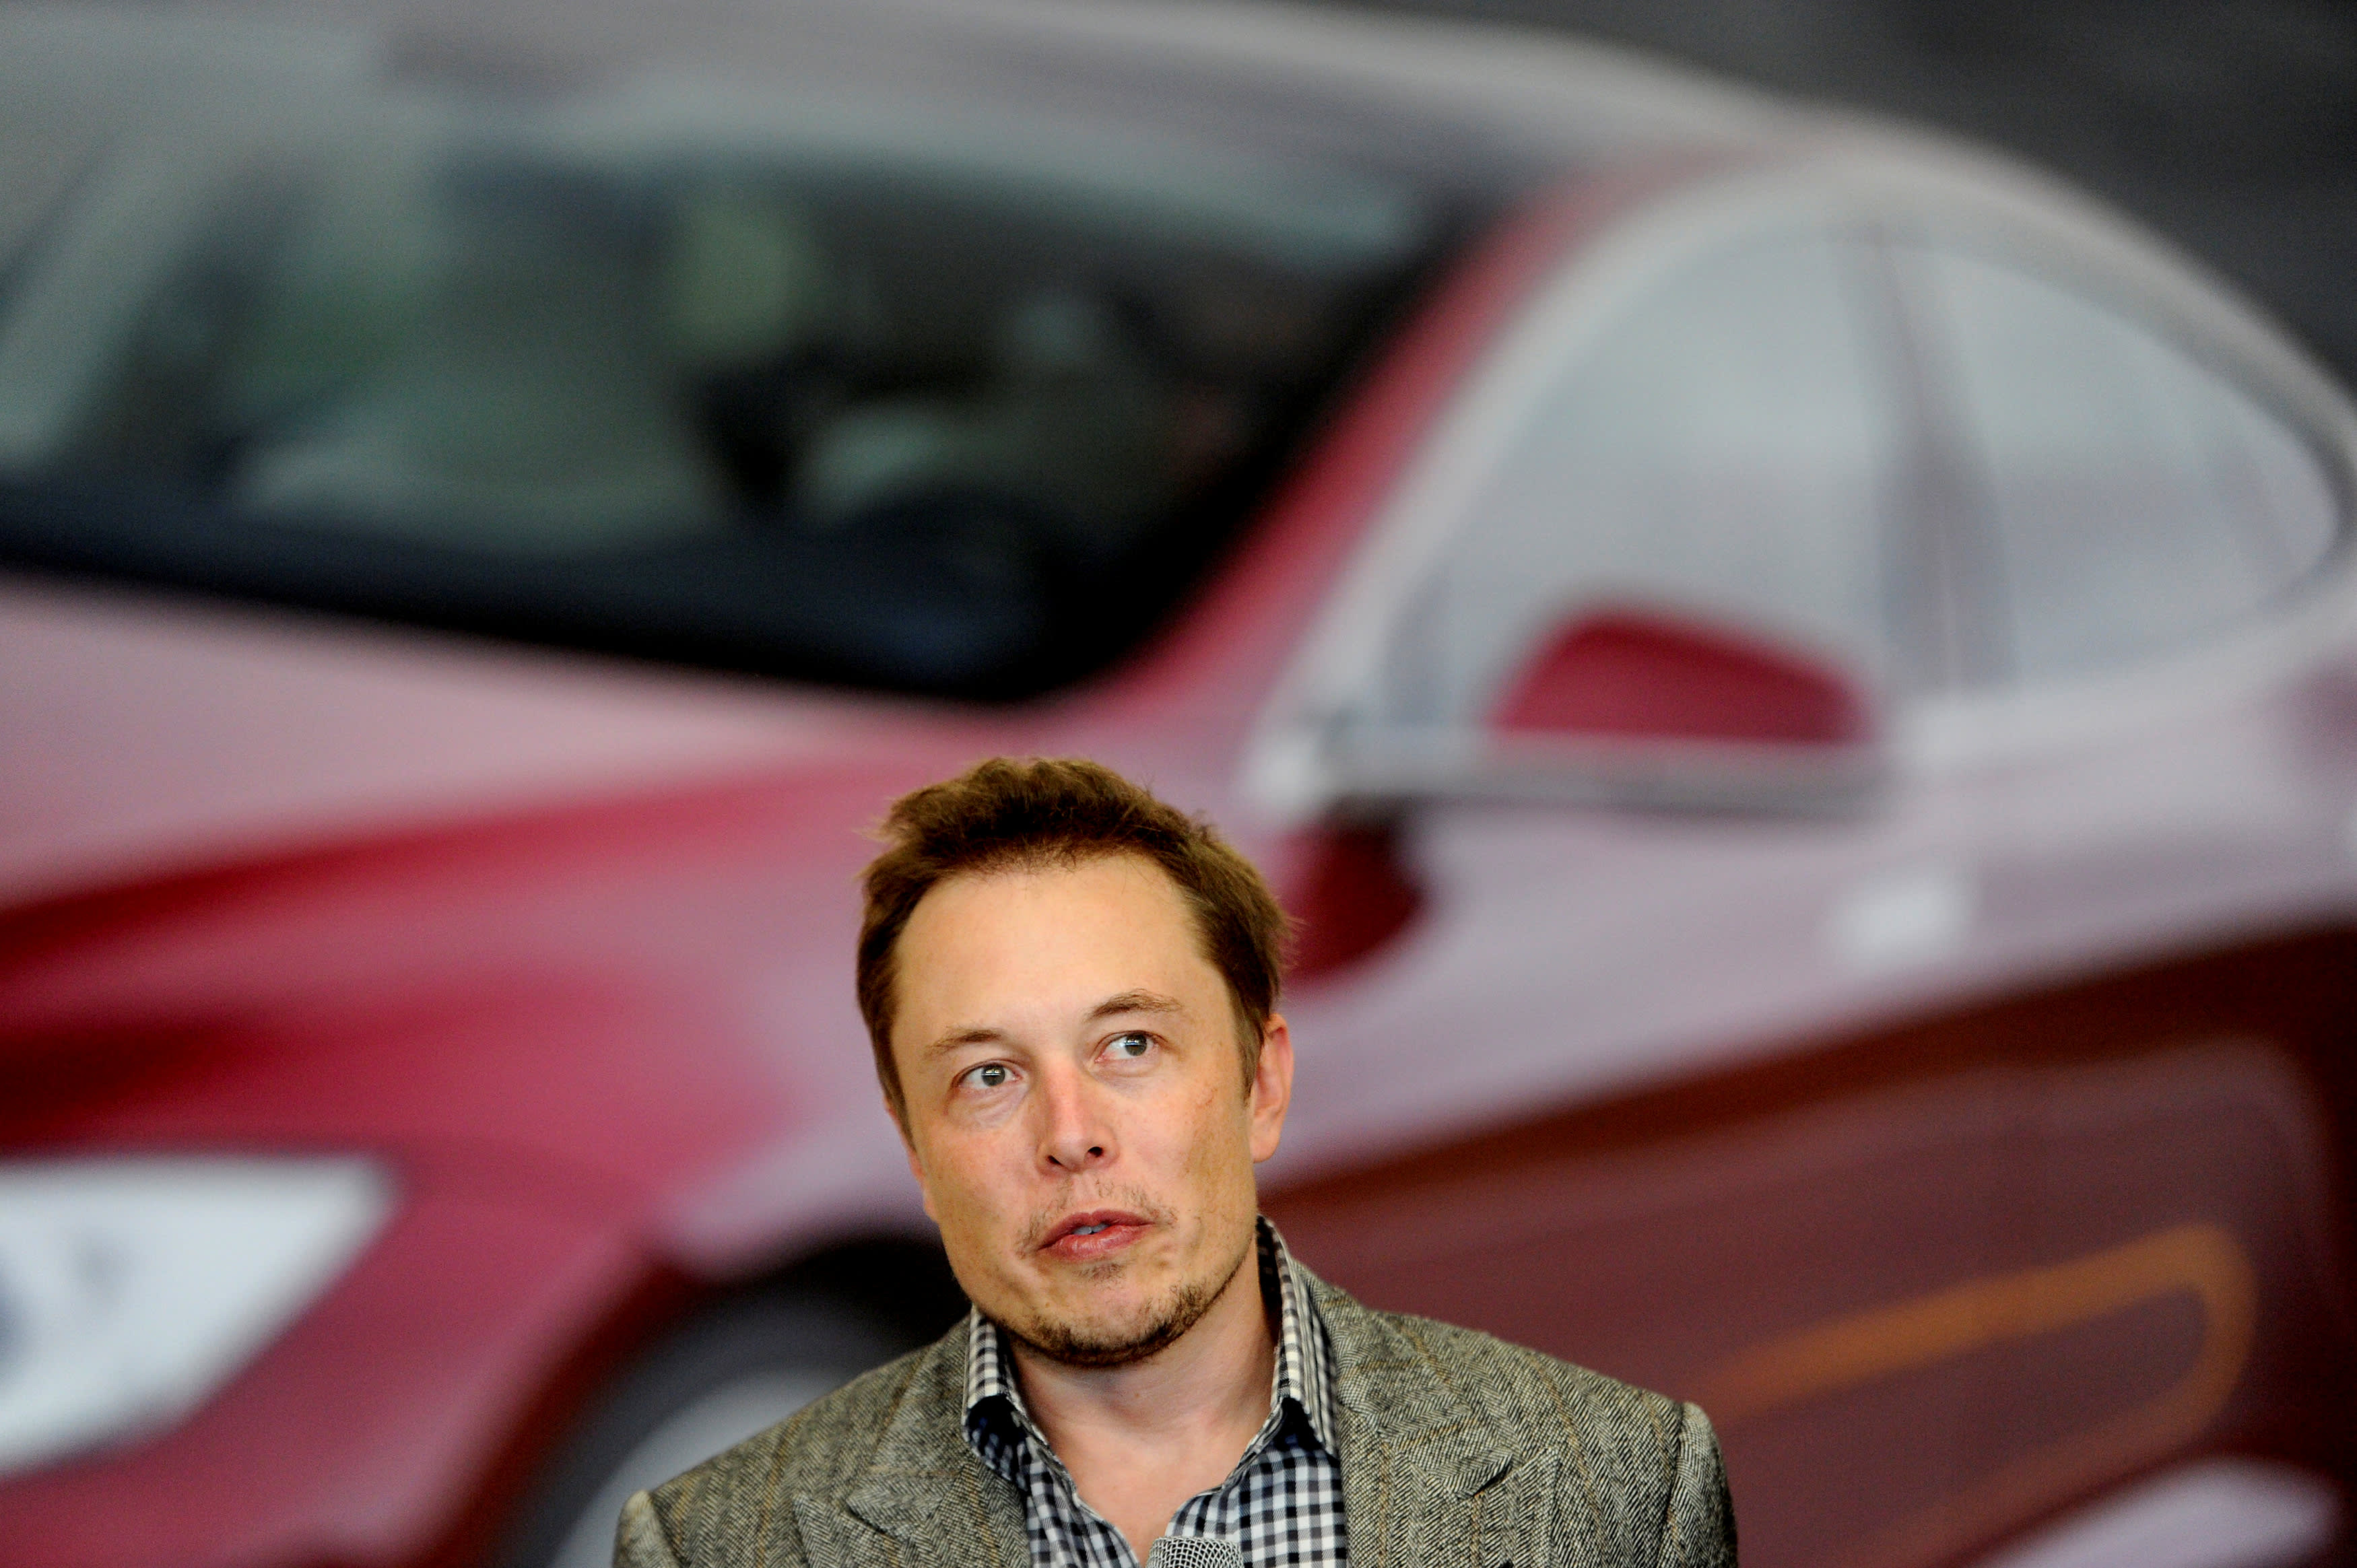 Tesla must pay $137 million to ex-worker over hostile work environment, racism